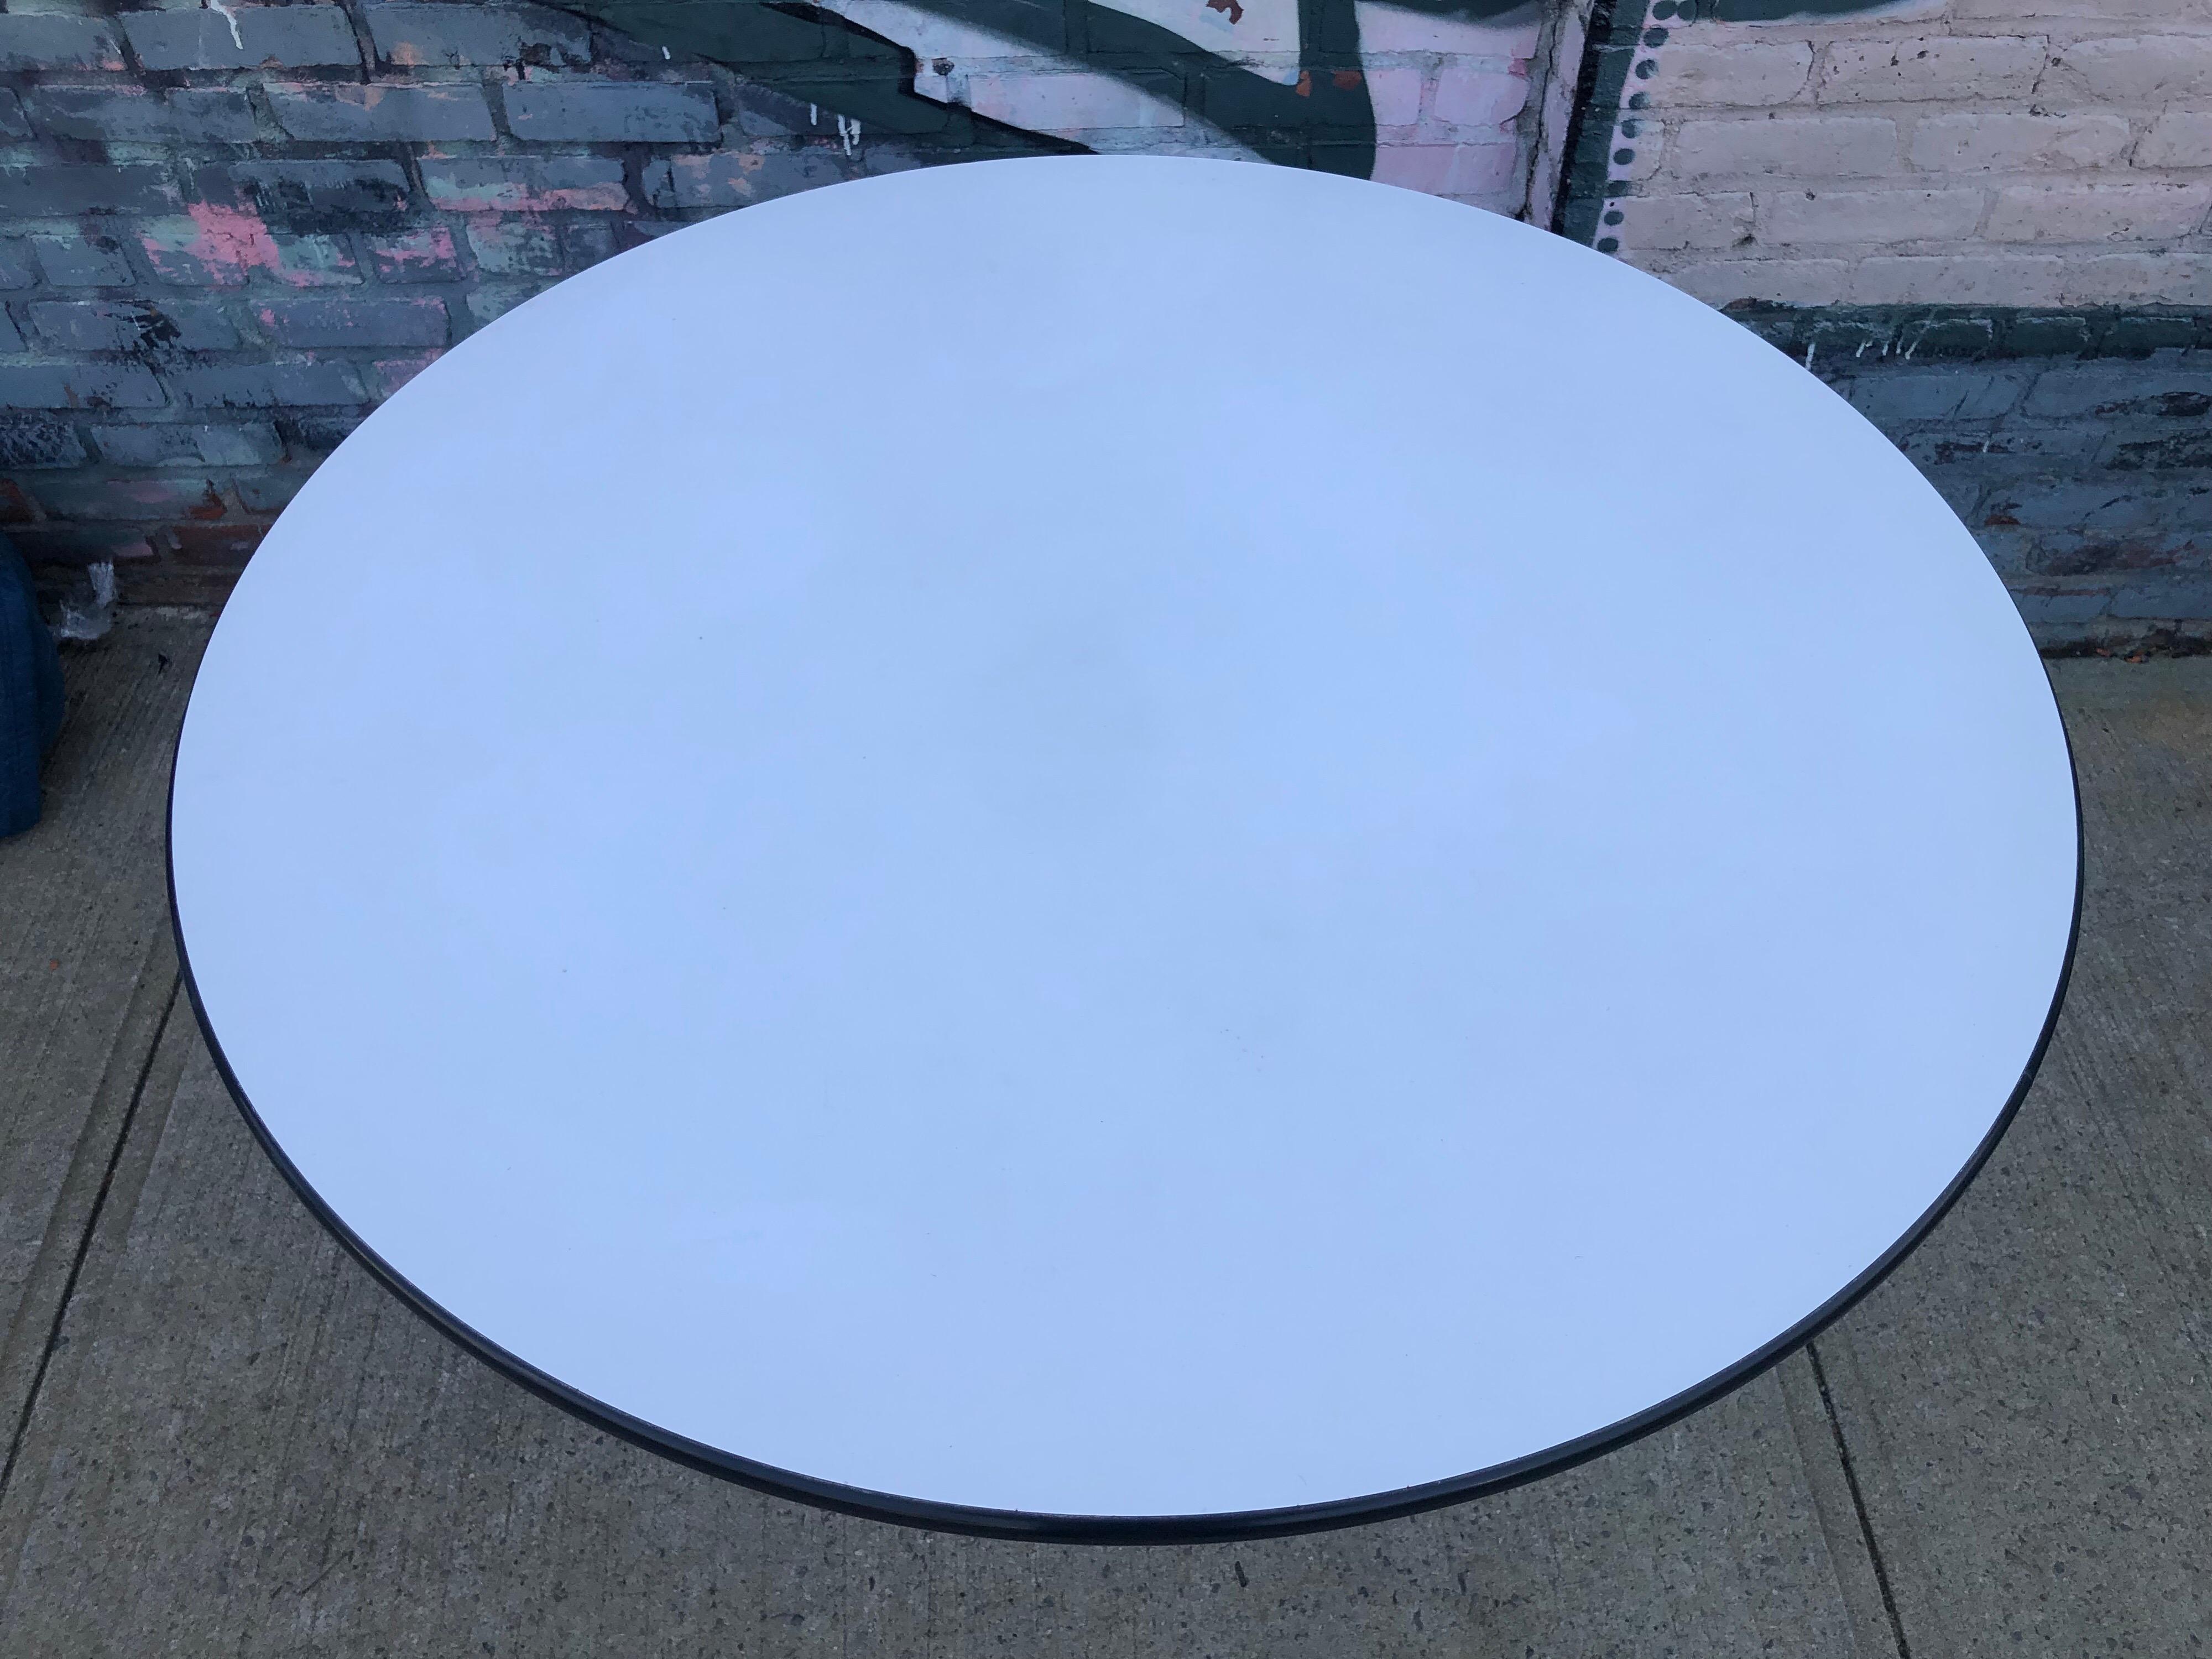 A large dining table produced by Herman Miller and designed by Charles and Ray Eames. This table features the early five star base which was also used on the Eames lounge chair. Only produced this way for a few years, the bases later change to a